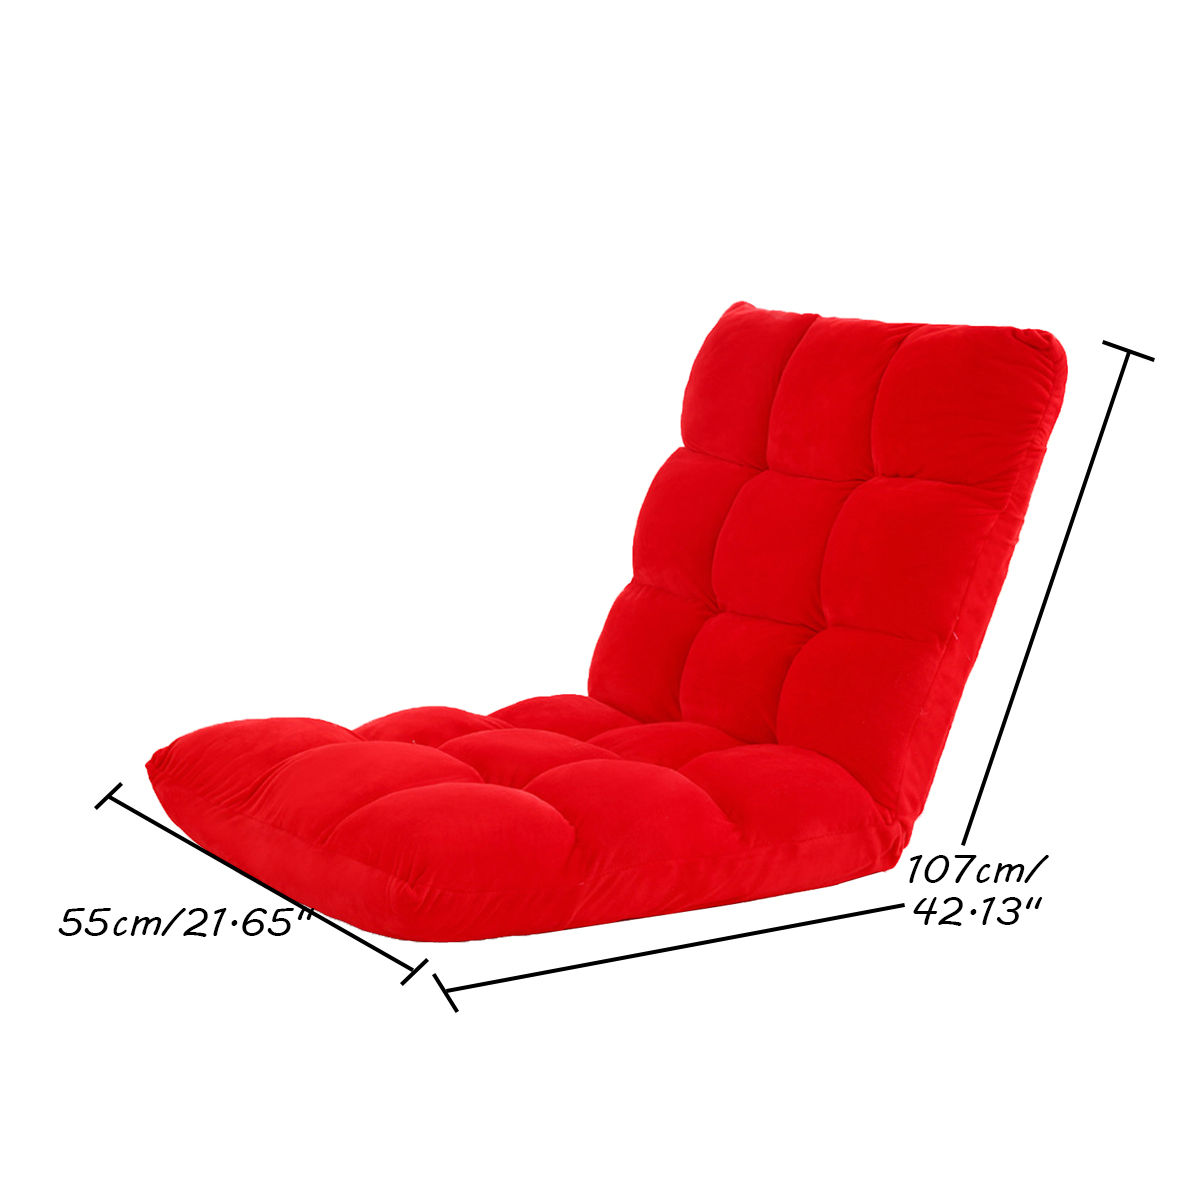 Adjustable Lazy Sofa Cushioned Floor Lounge Chair Living Room Leisure Chaise Chair 7